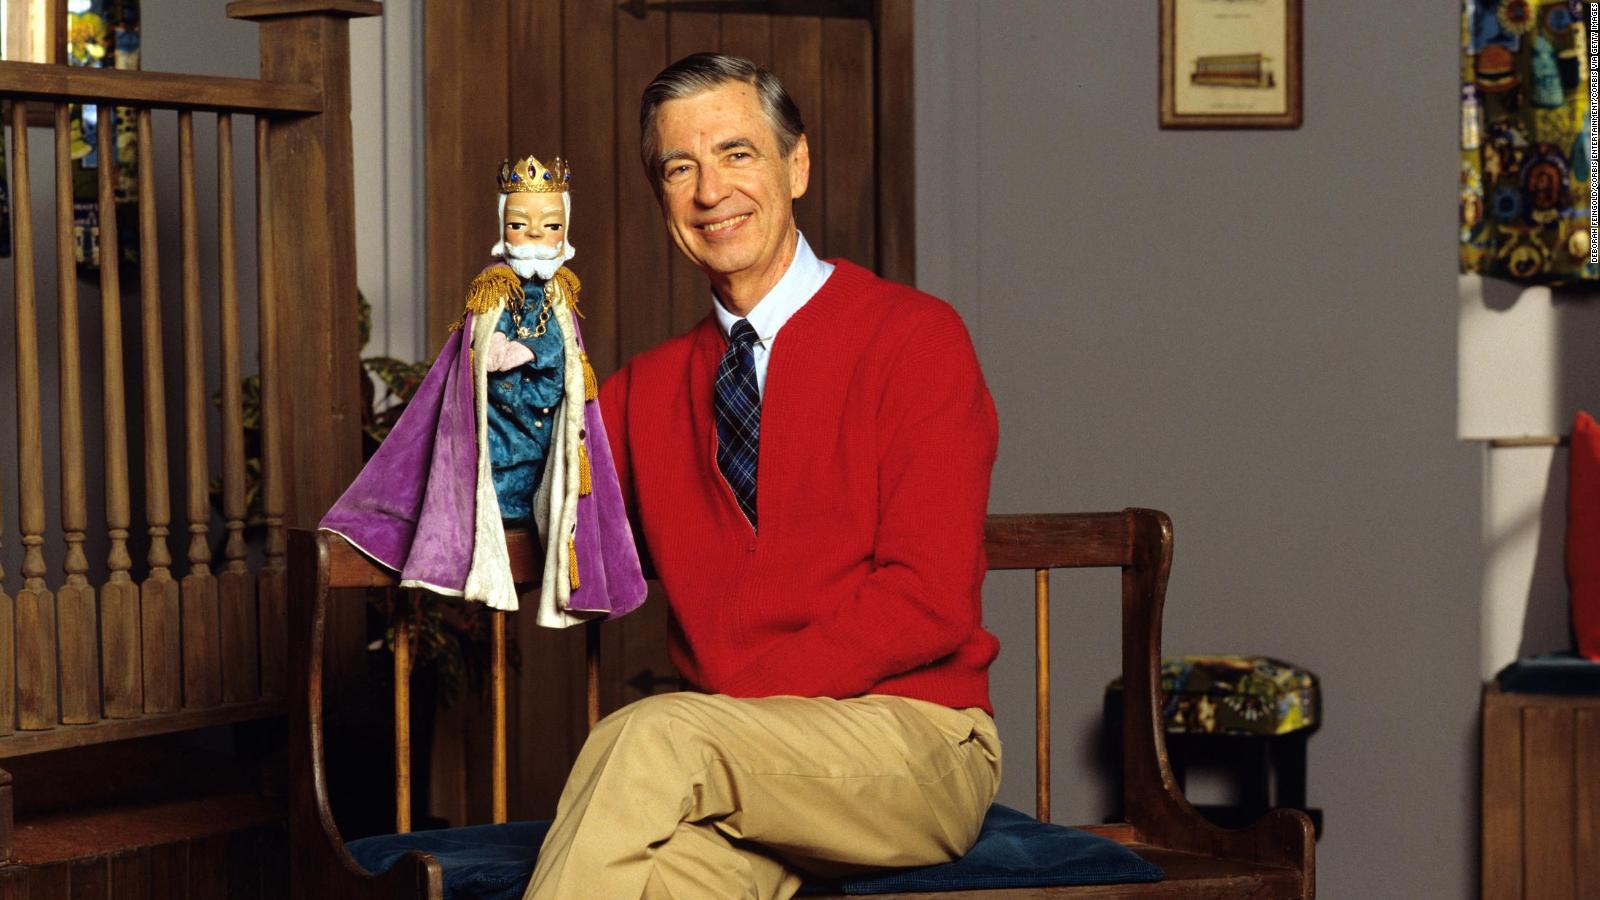 Fred Rogers' famous cardigans: A look back